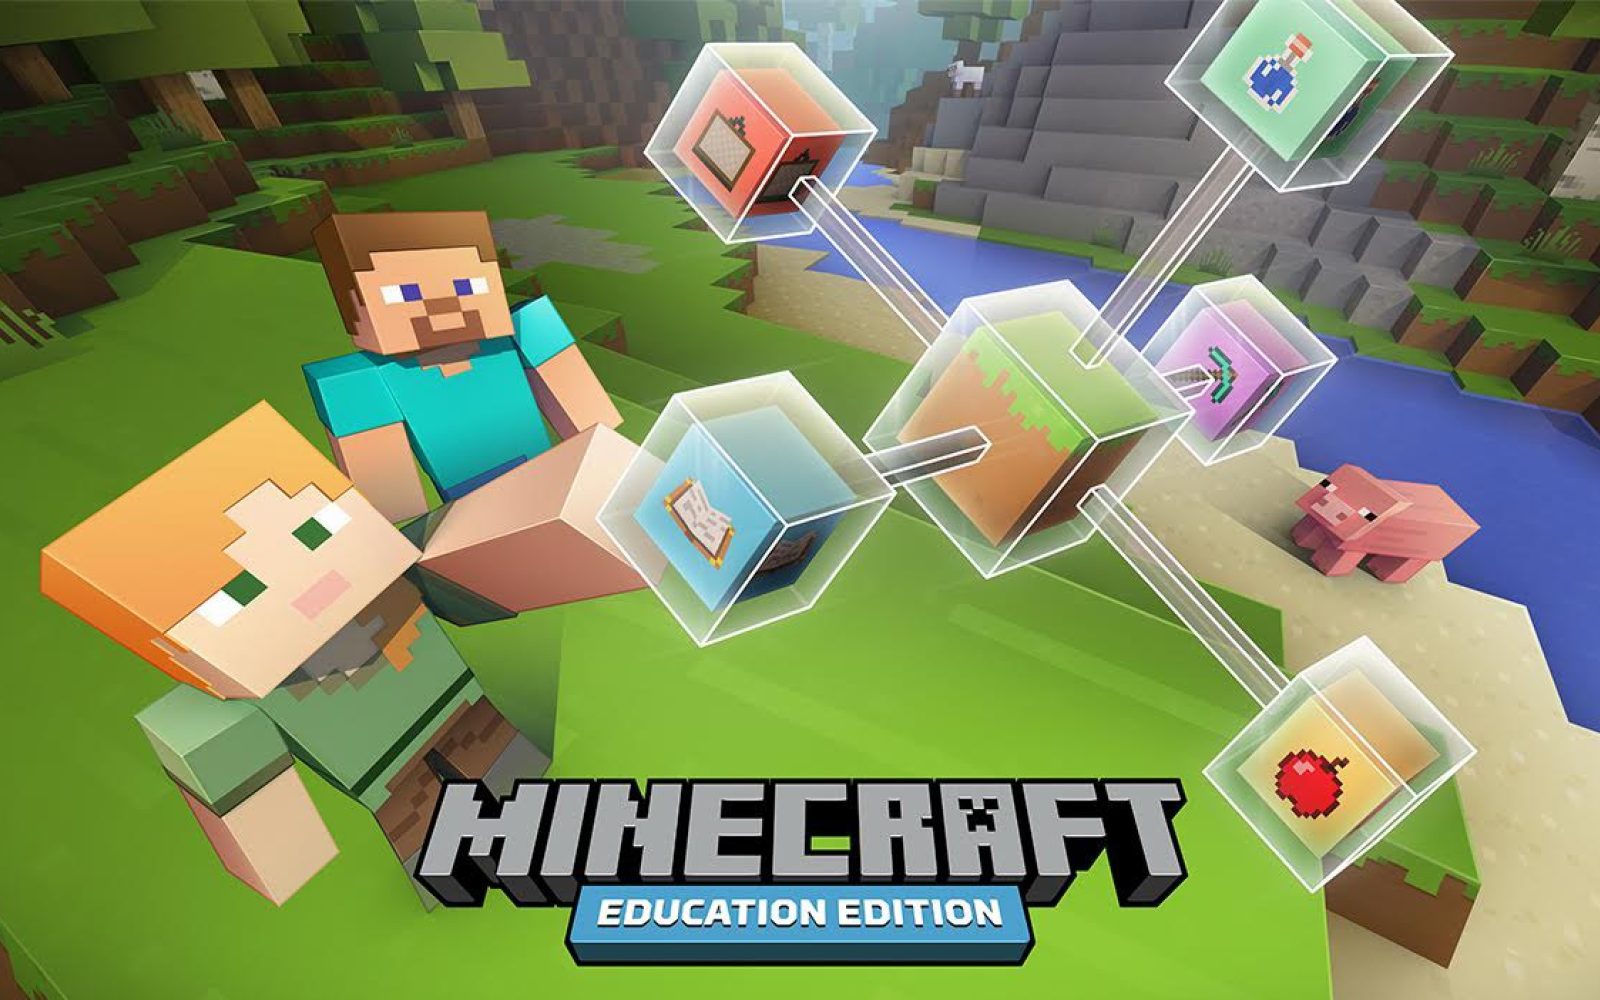 Does minecraft for education work on a macbook